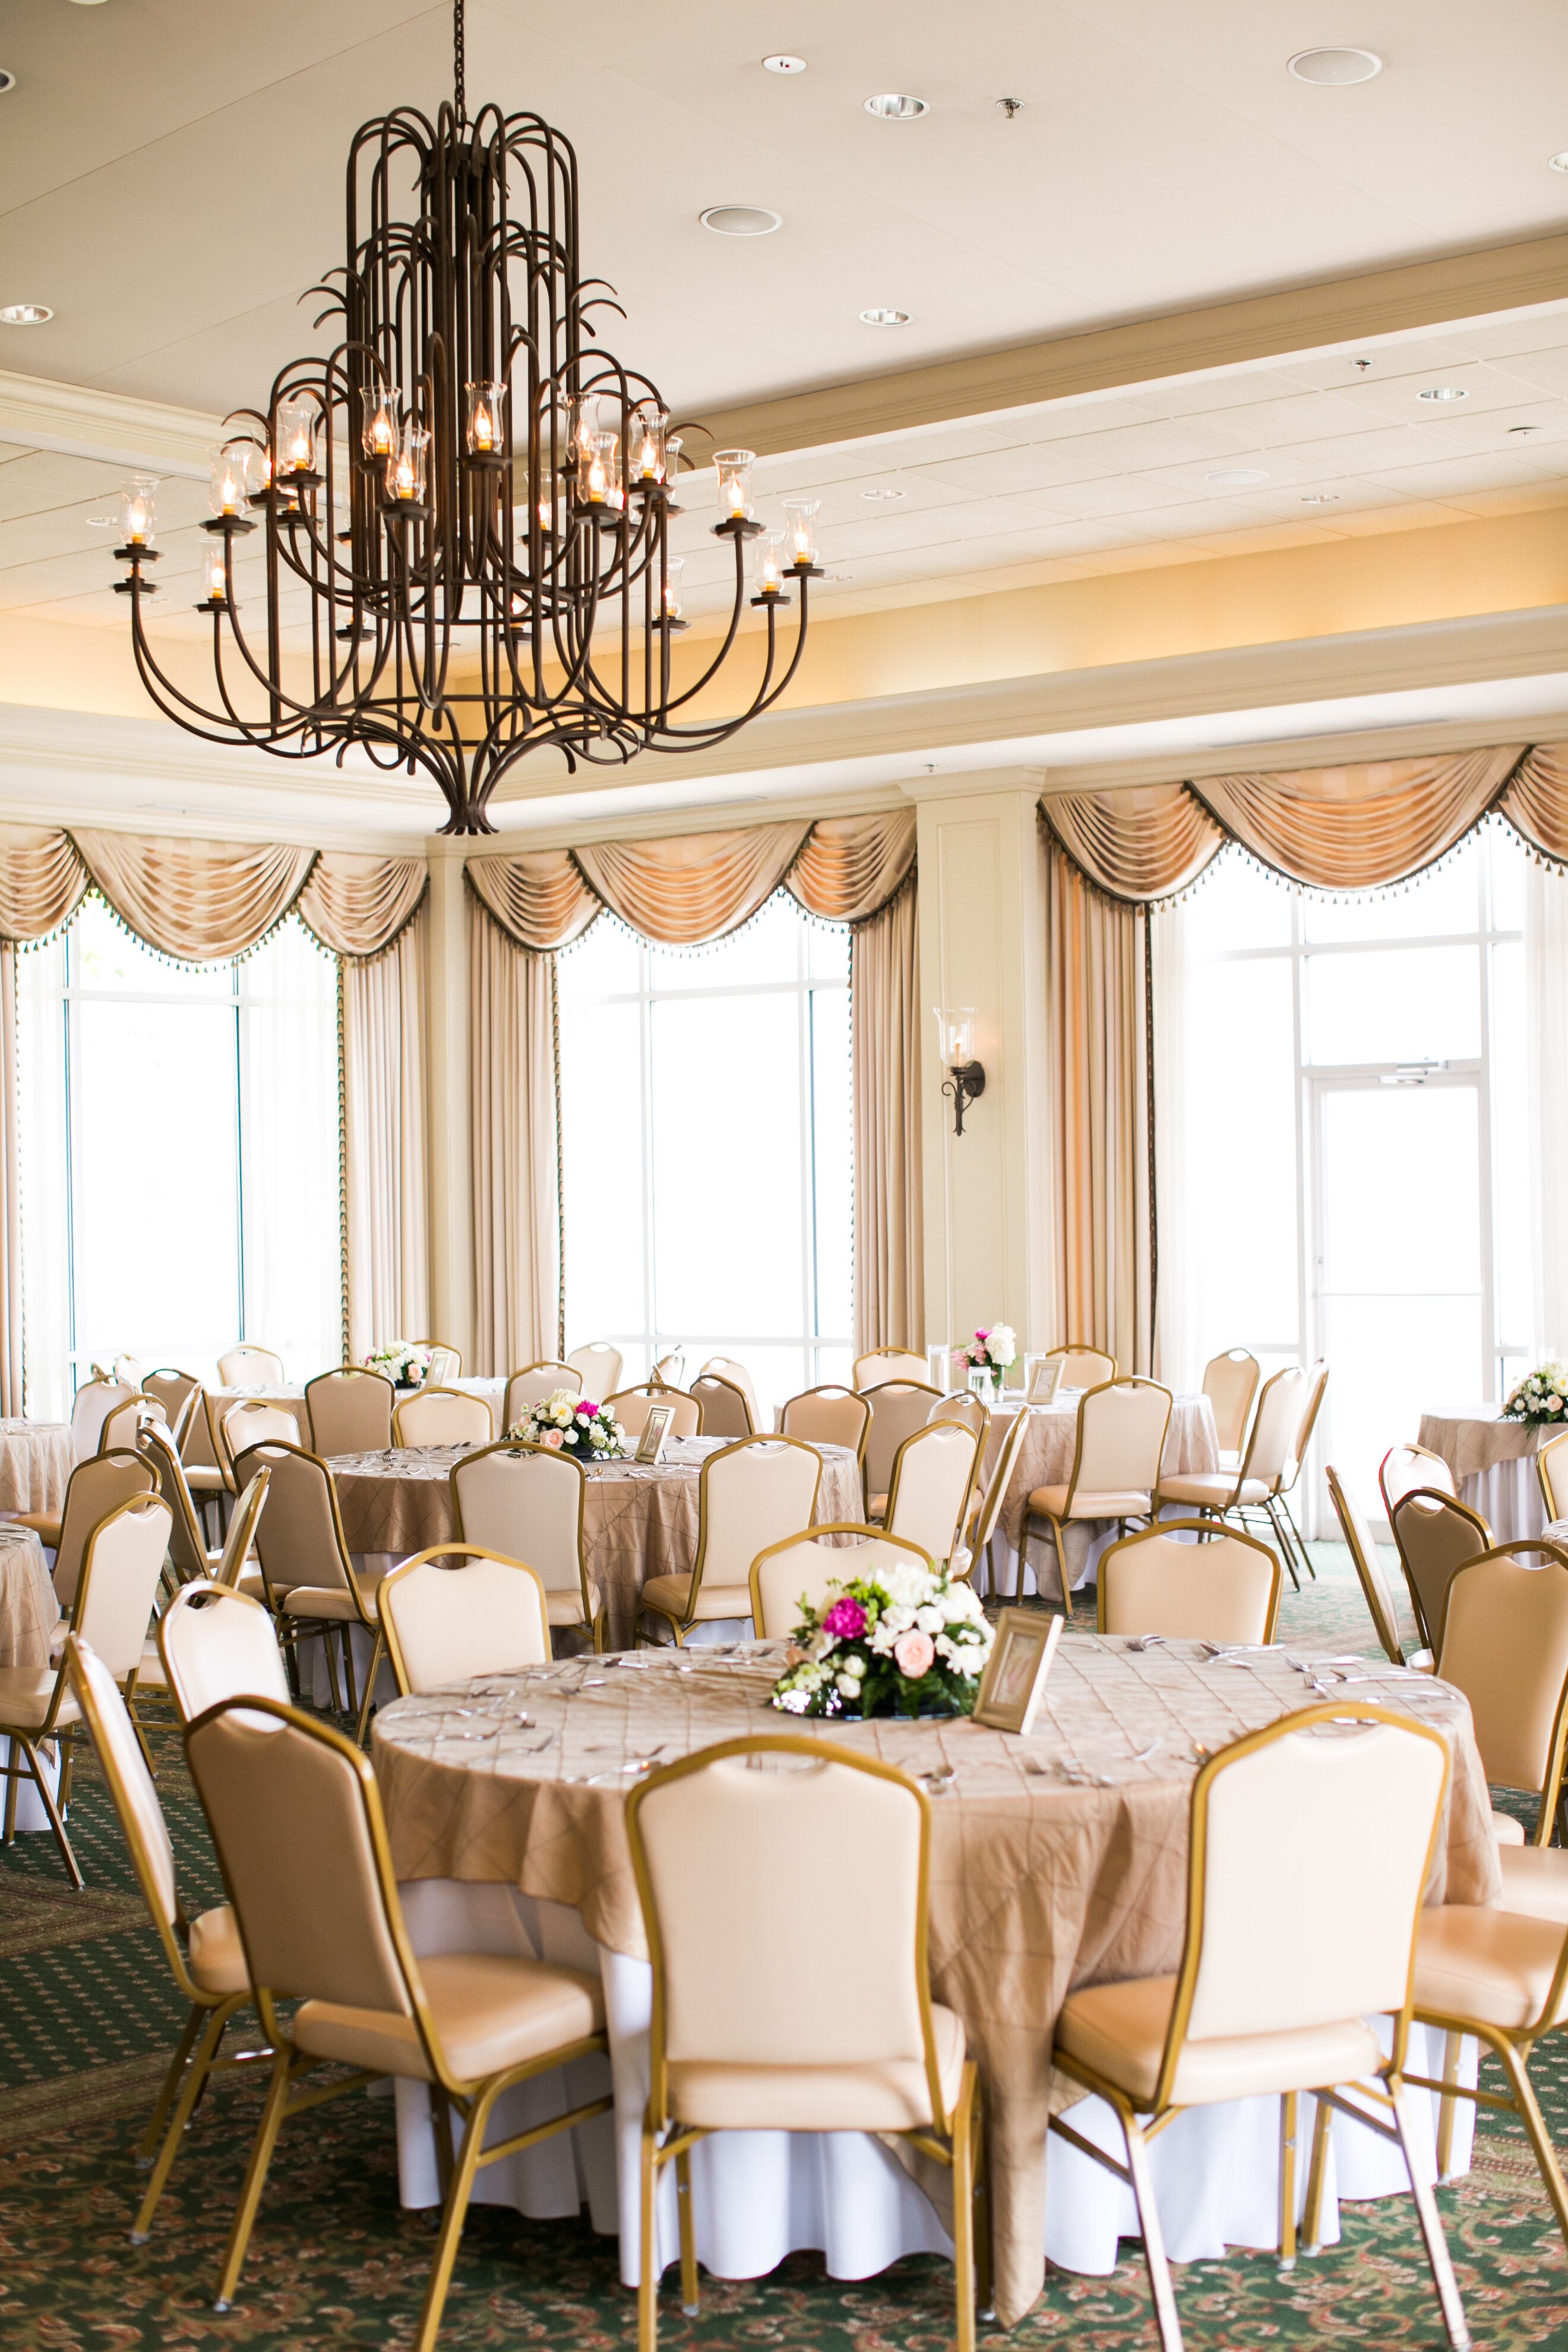 Rehoboth Beach Yacht and Country Club Venue